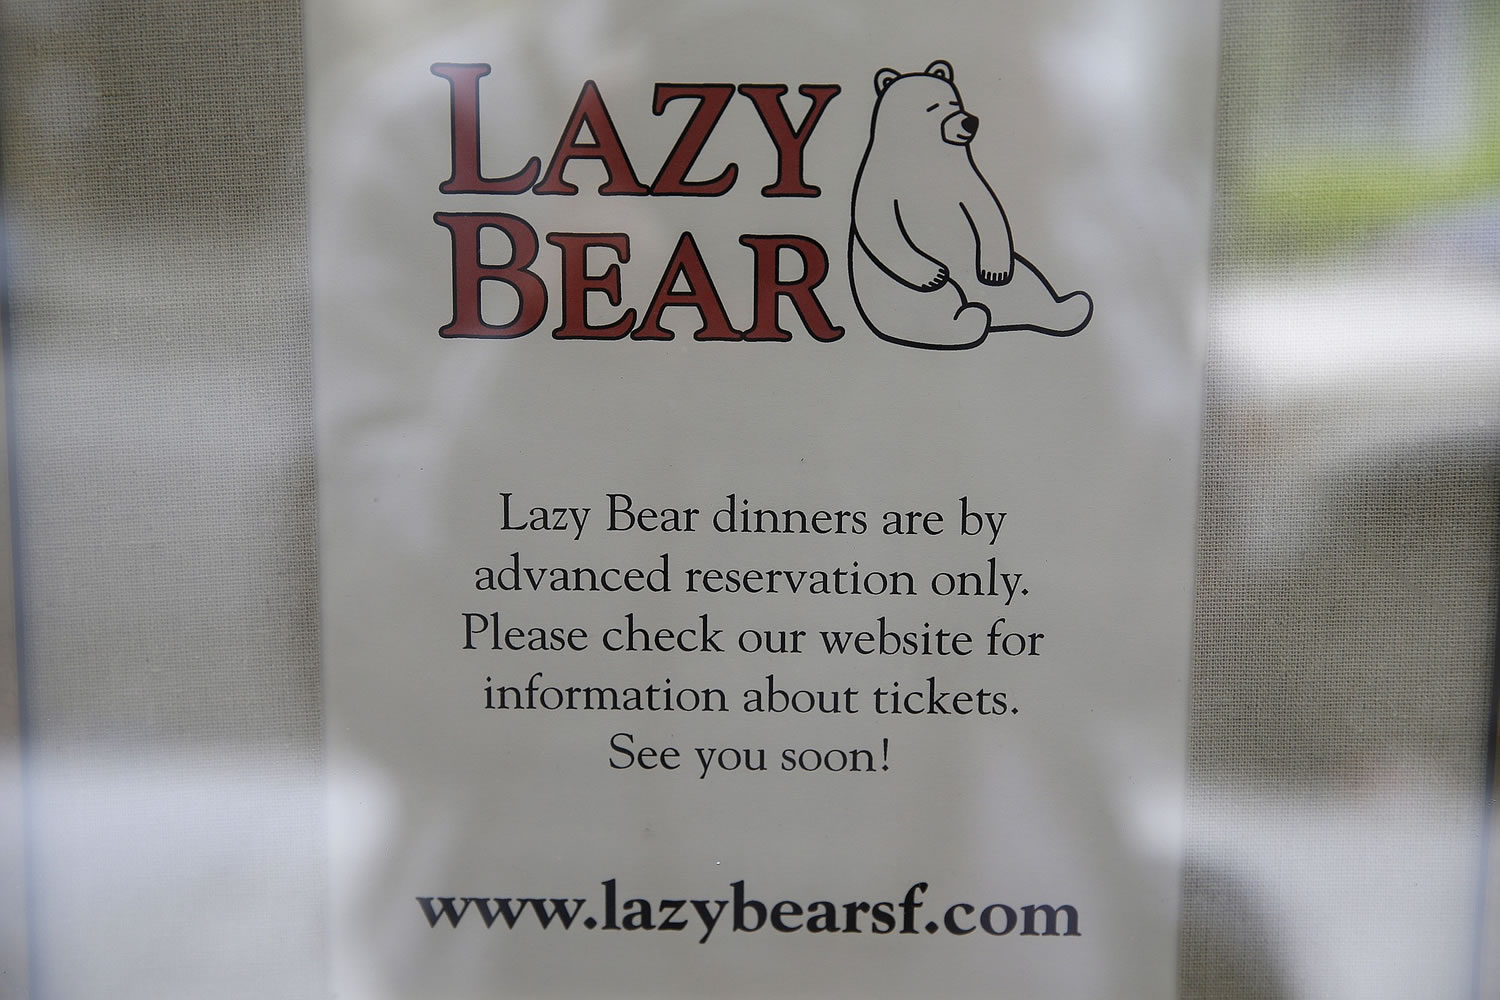 A sign in the front window explains how to purchase tickets to dine at the Lazy Bear restaurant in San Francisco.